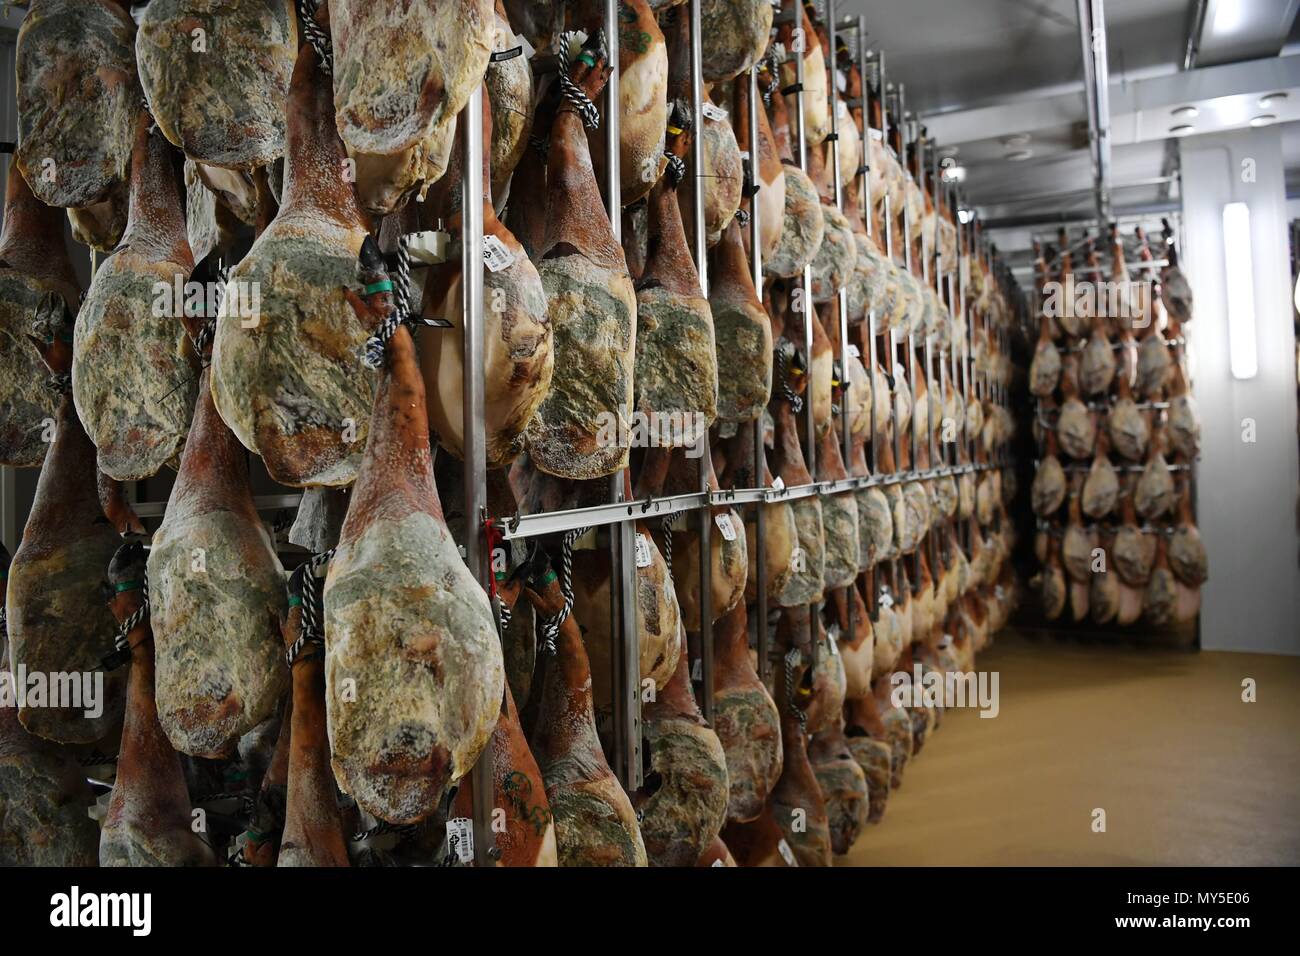 Madrid, Spain. 31st May, 2018. Salted pig legs are hung in a ...